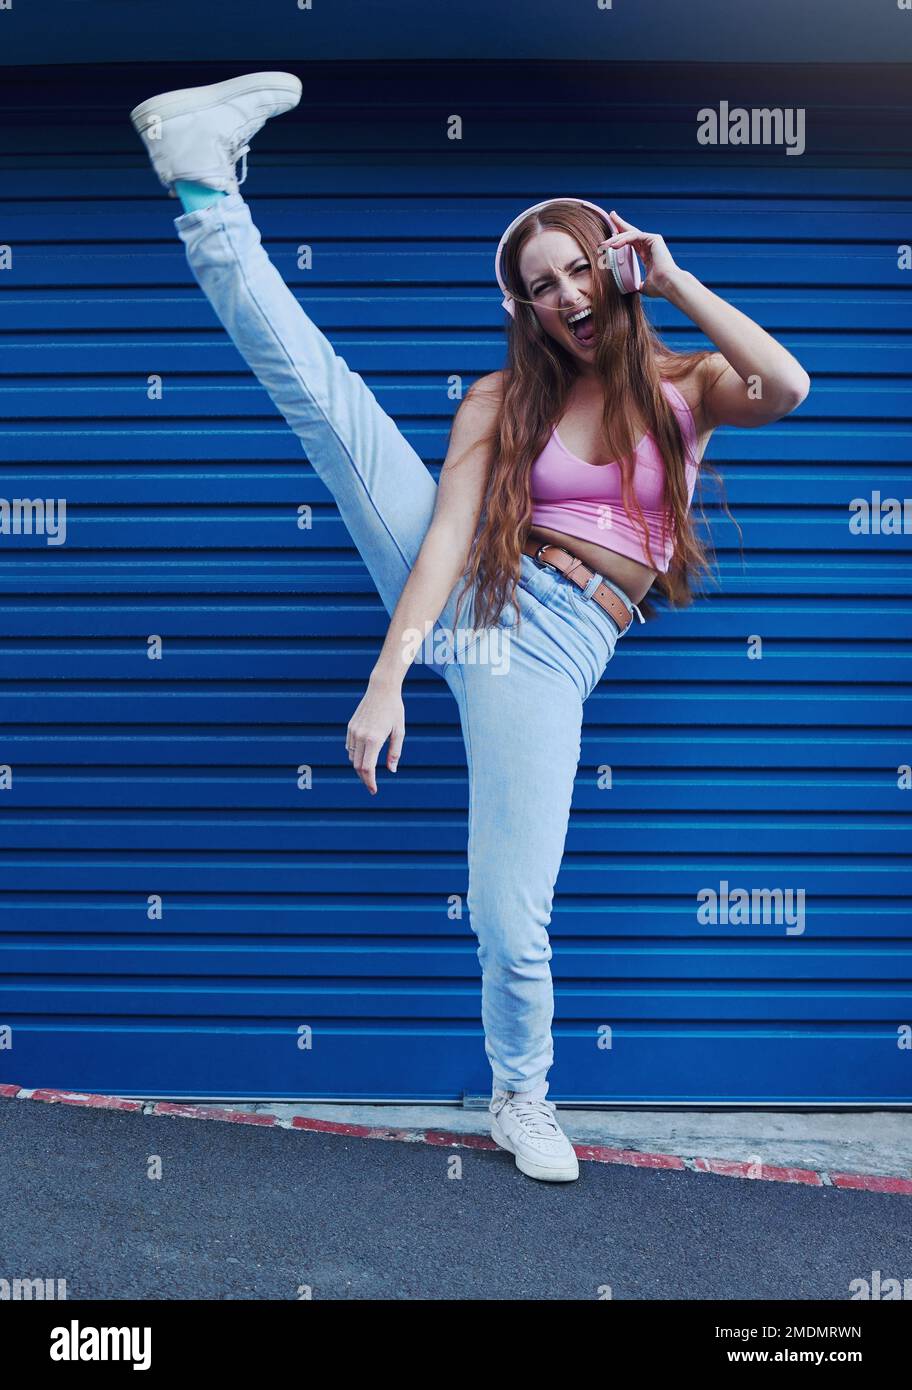 Crazy music, freedom and excited girl on blue background in city listening to track and audio on headphones. Fashion, lifestyle and woman with leg up Stock Photo